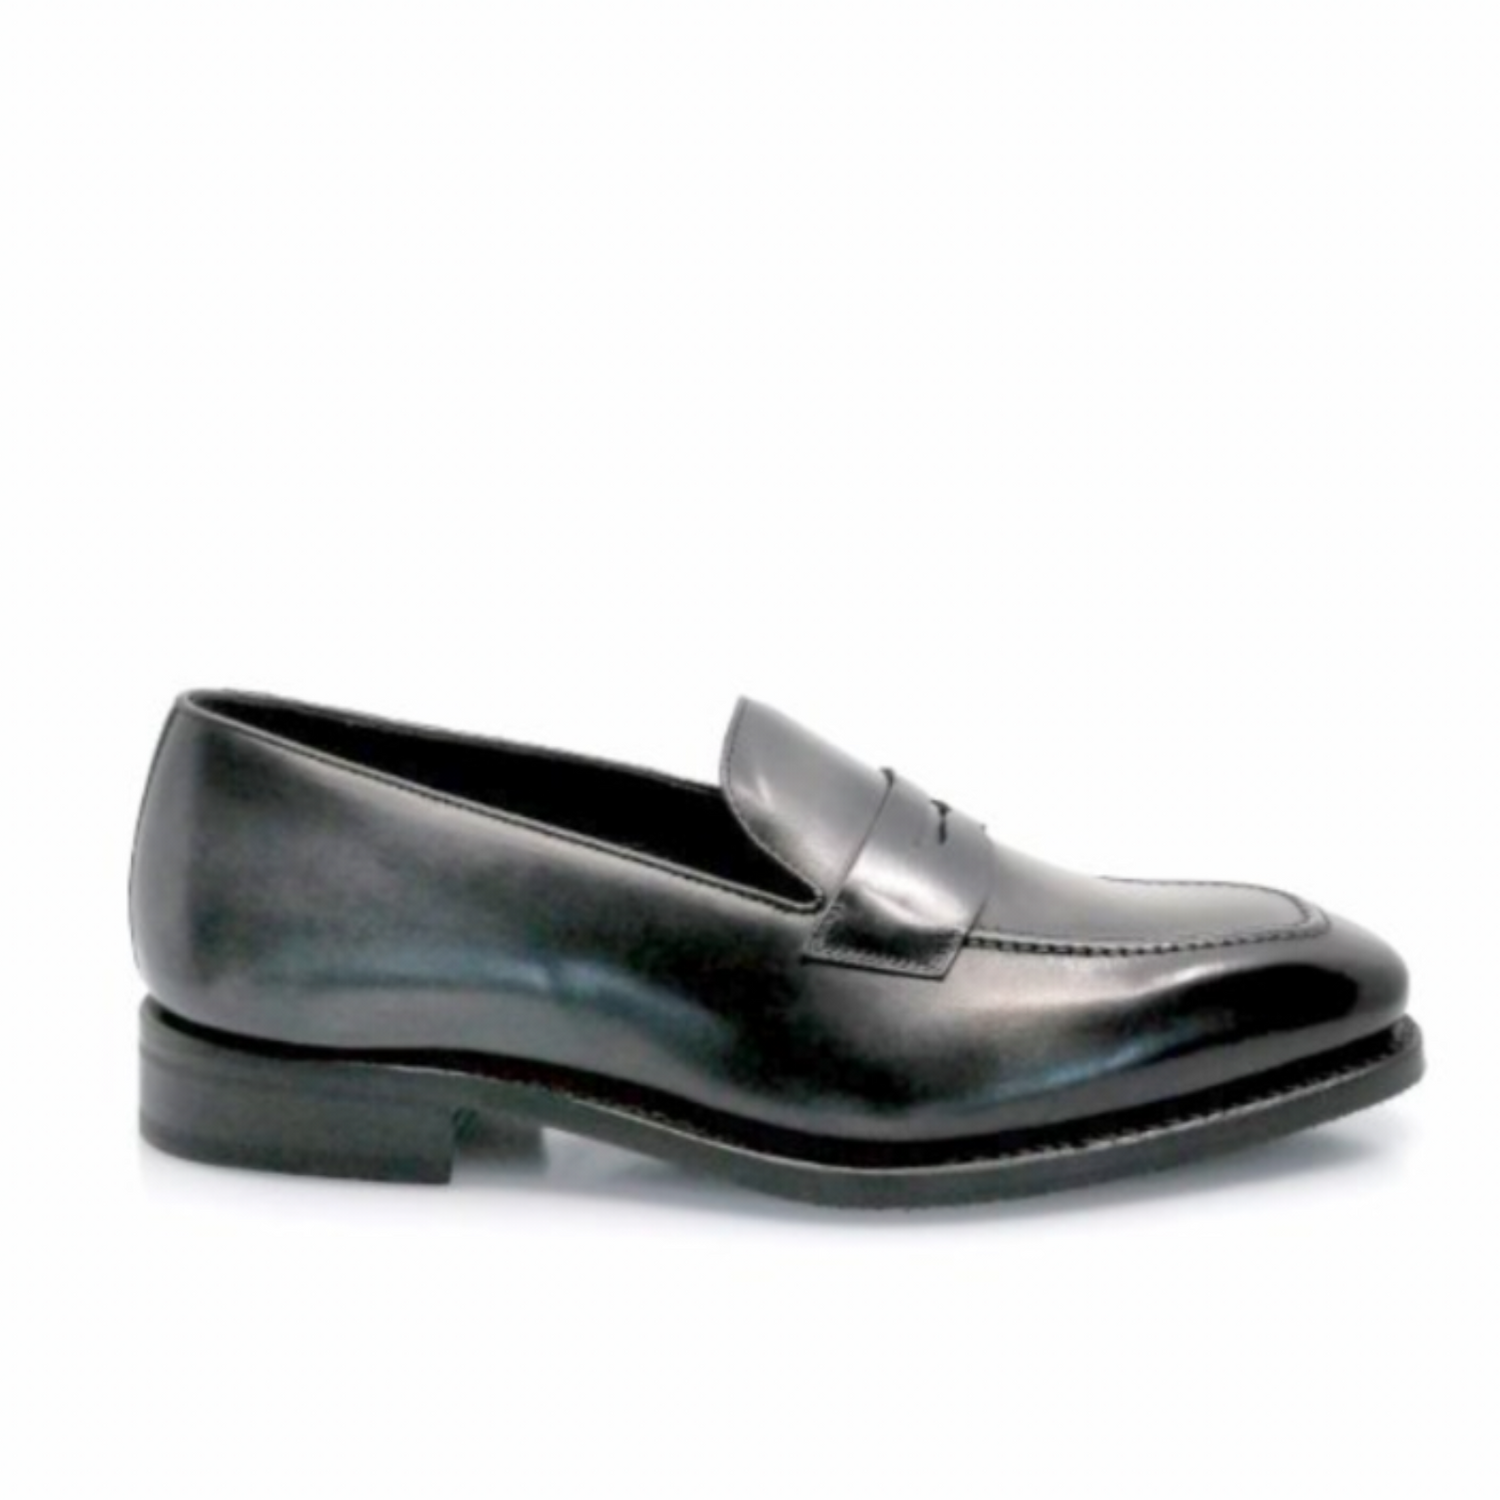 Black leather hand dyed gunmetal loafer goodyear welt